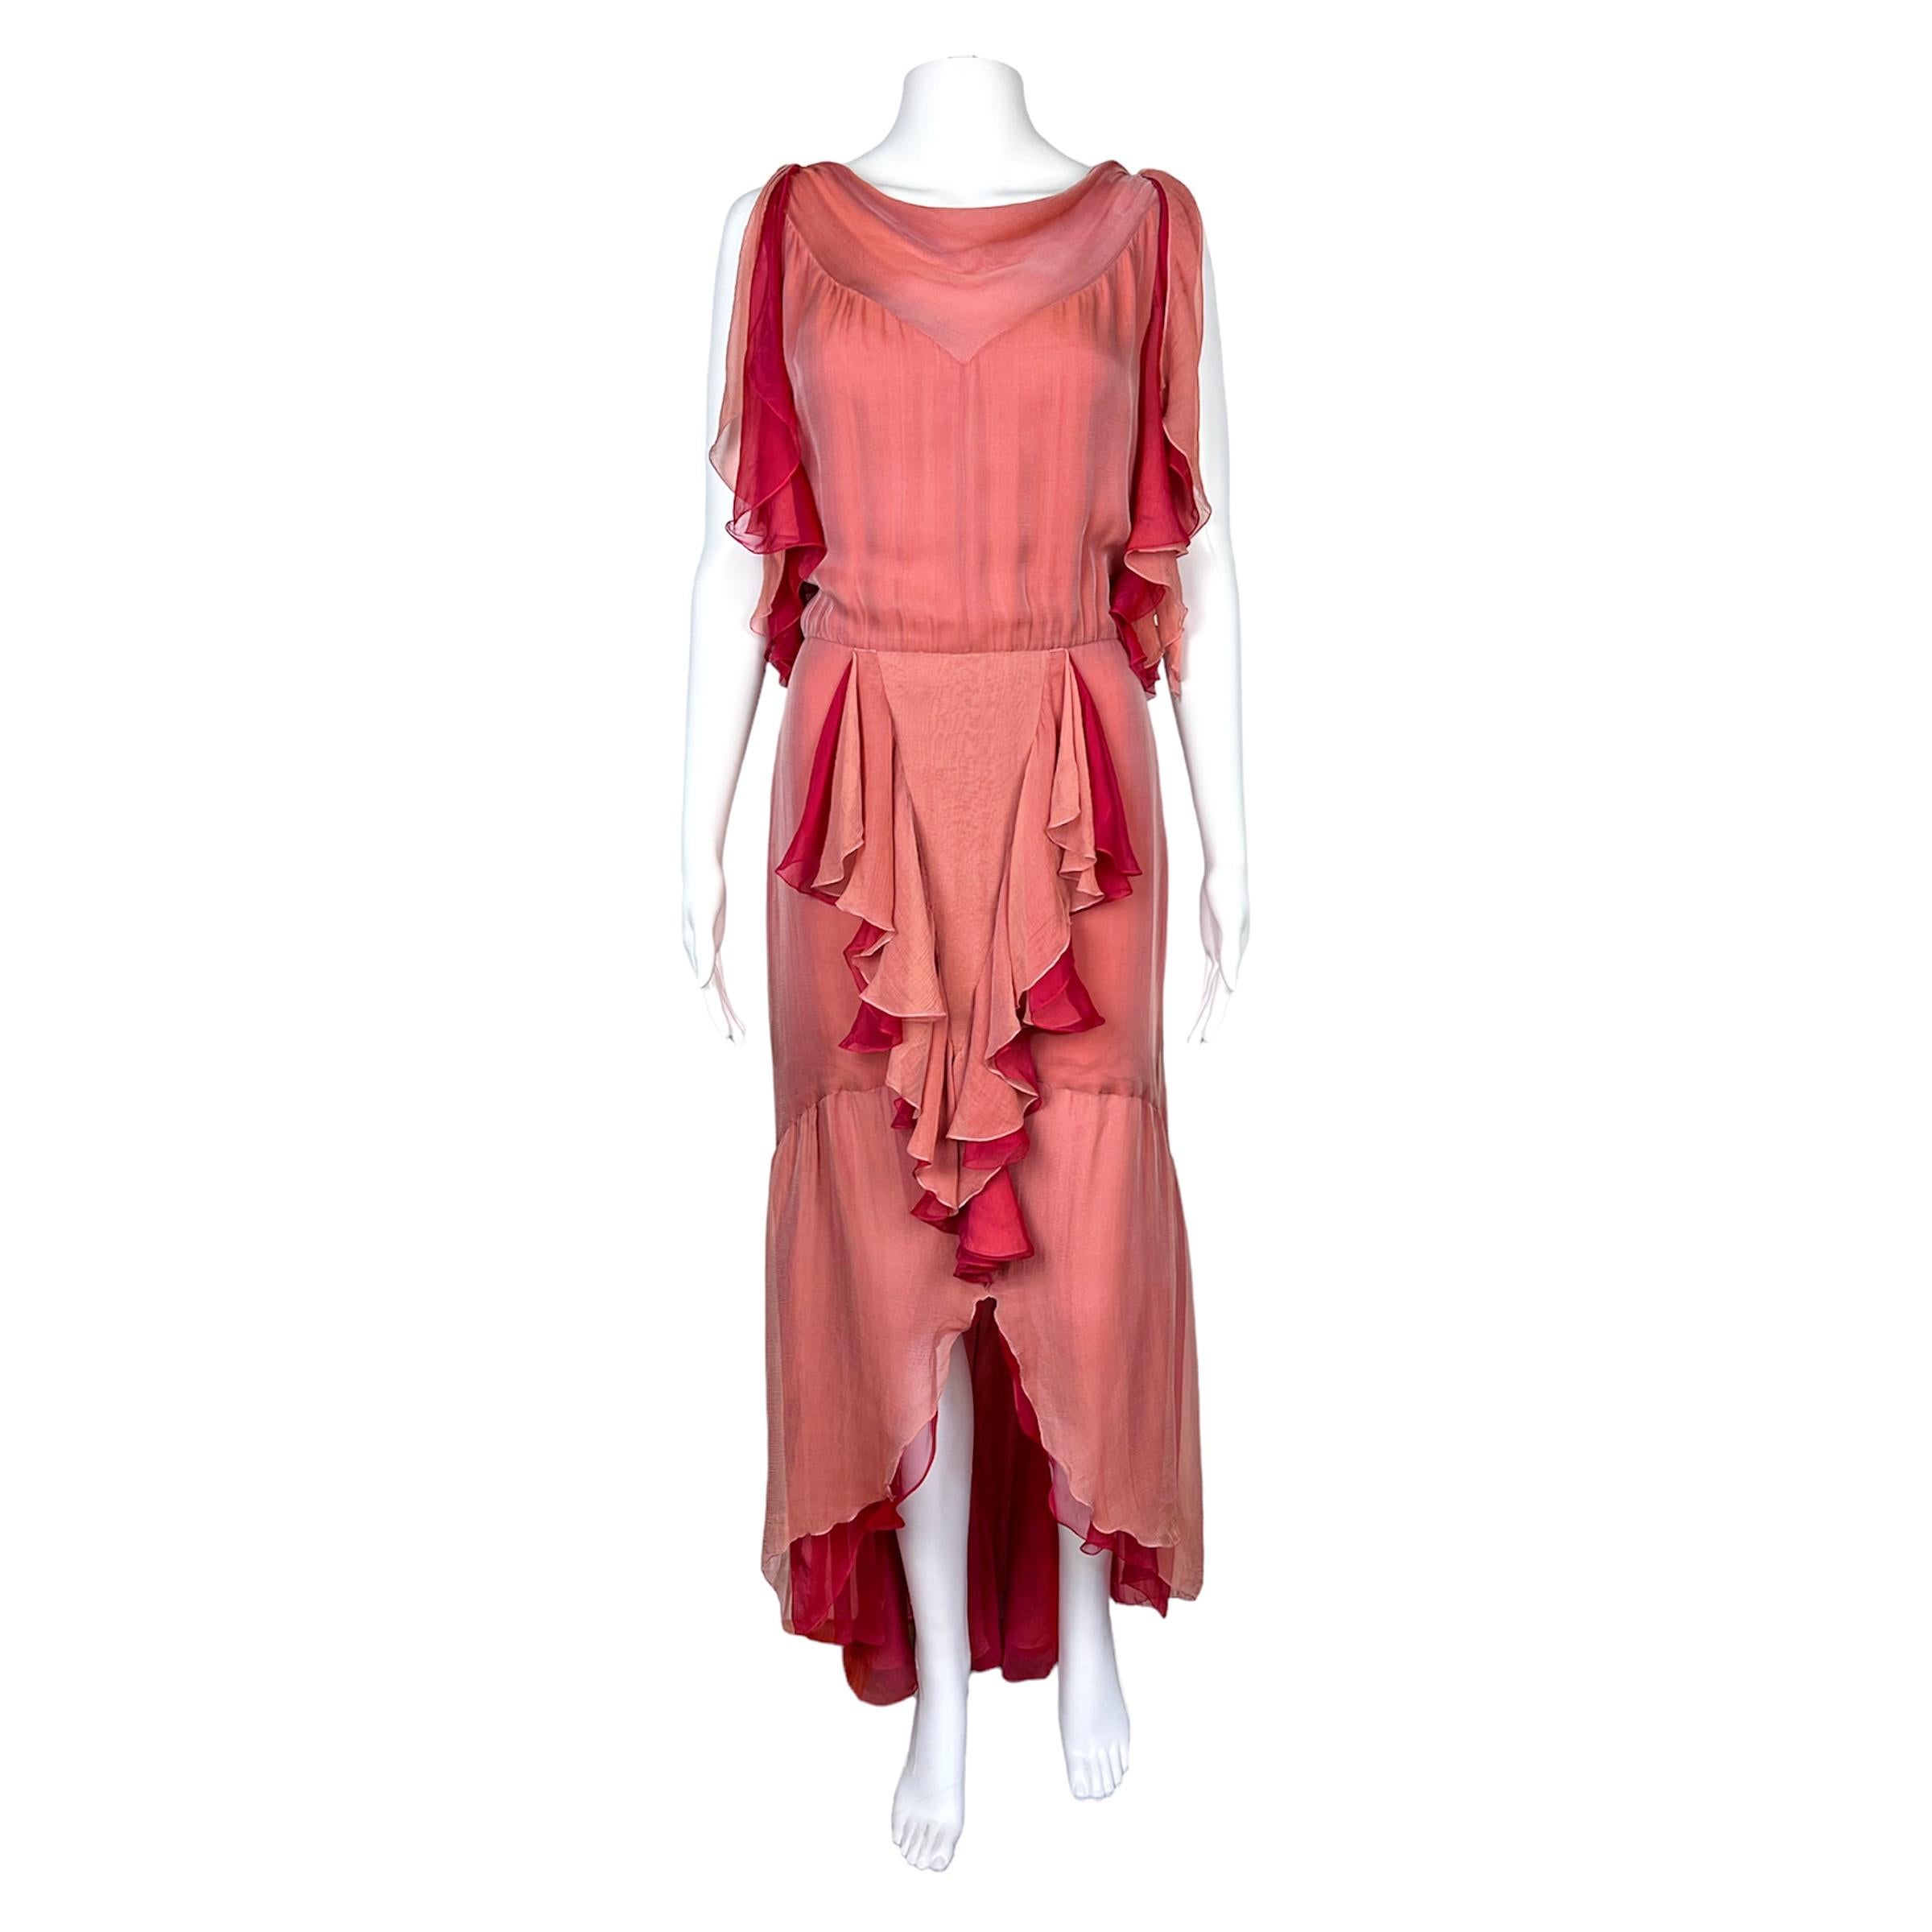 Gorgeous Chanel by Karl Lagerfeld two tones pink dress in silk chiffon with ruffles and front slit from Spring Summer 2001 collection as seen on the runway that season. 

Size on tag is 38. 

Condition: Excellent / Flaws: Sweat stains under armpits